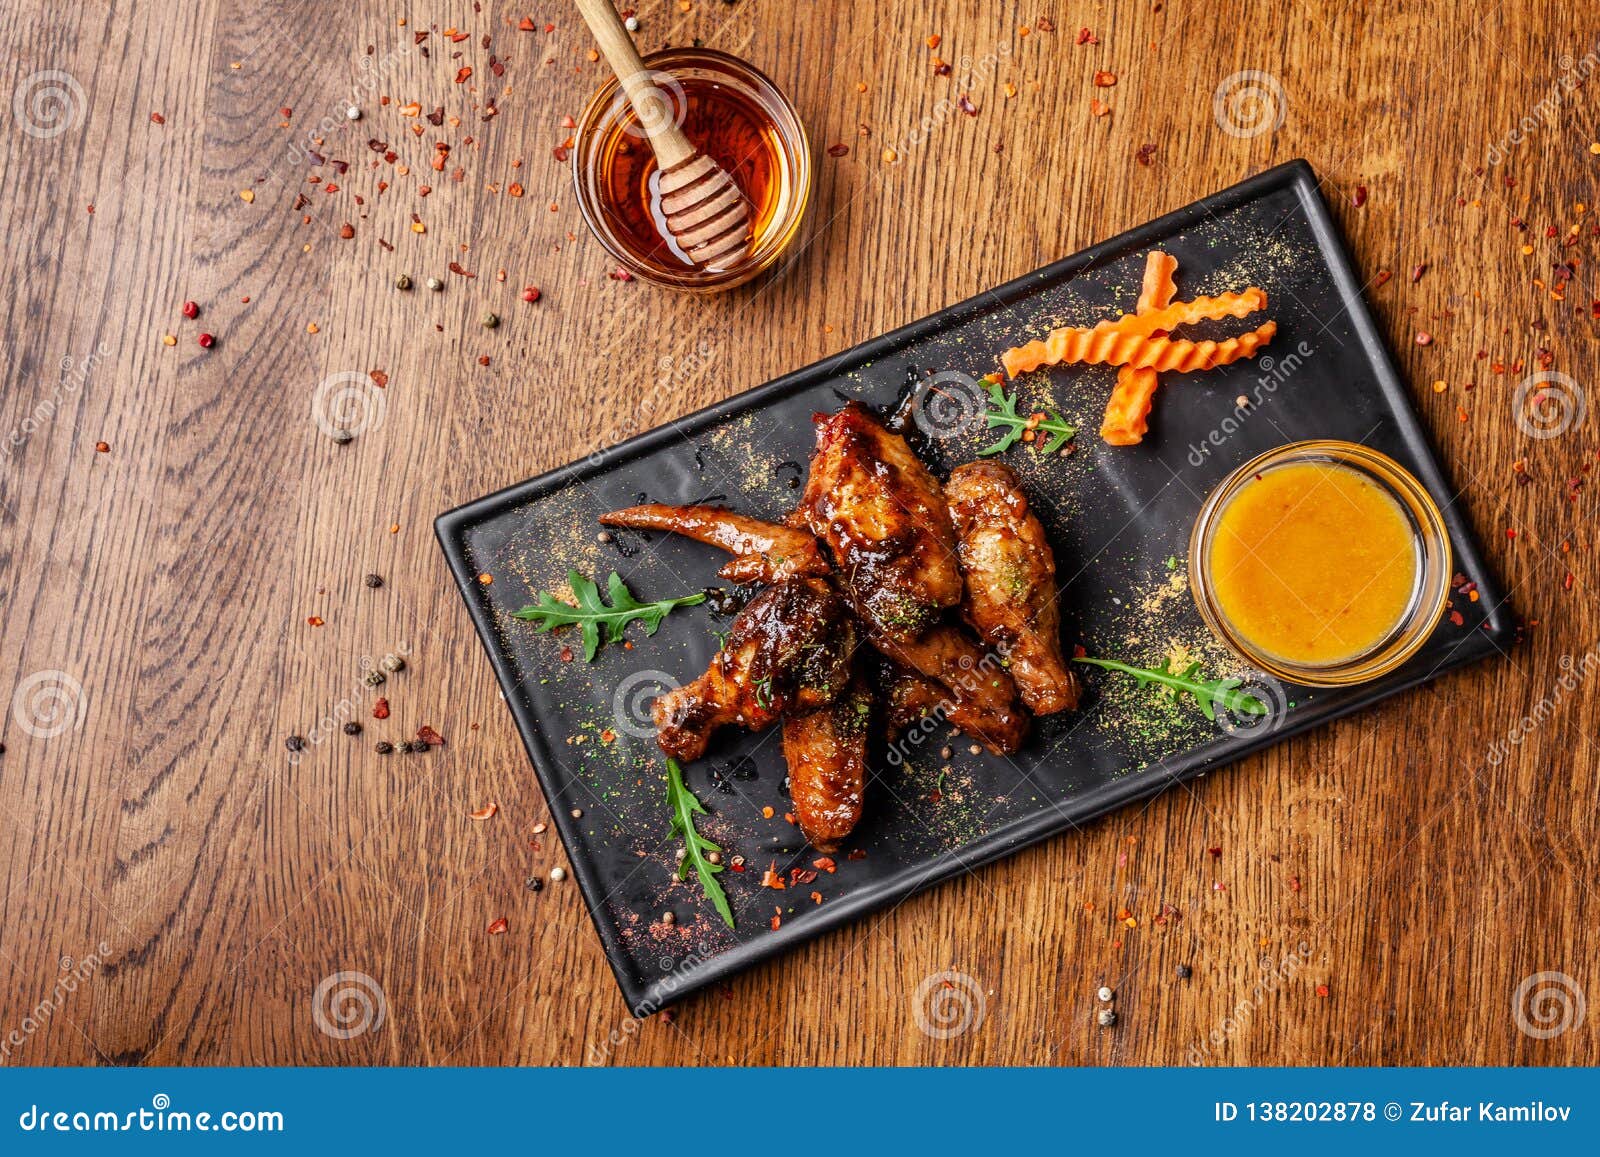 The Concept Of Indian Cuisine. Baked Chicken Wings And ...